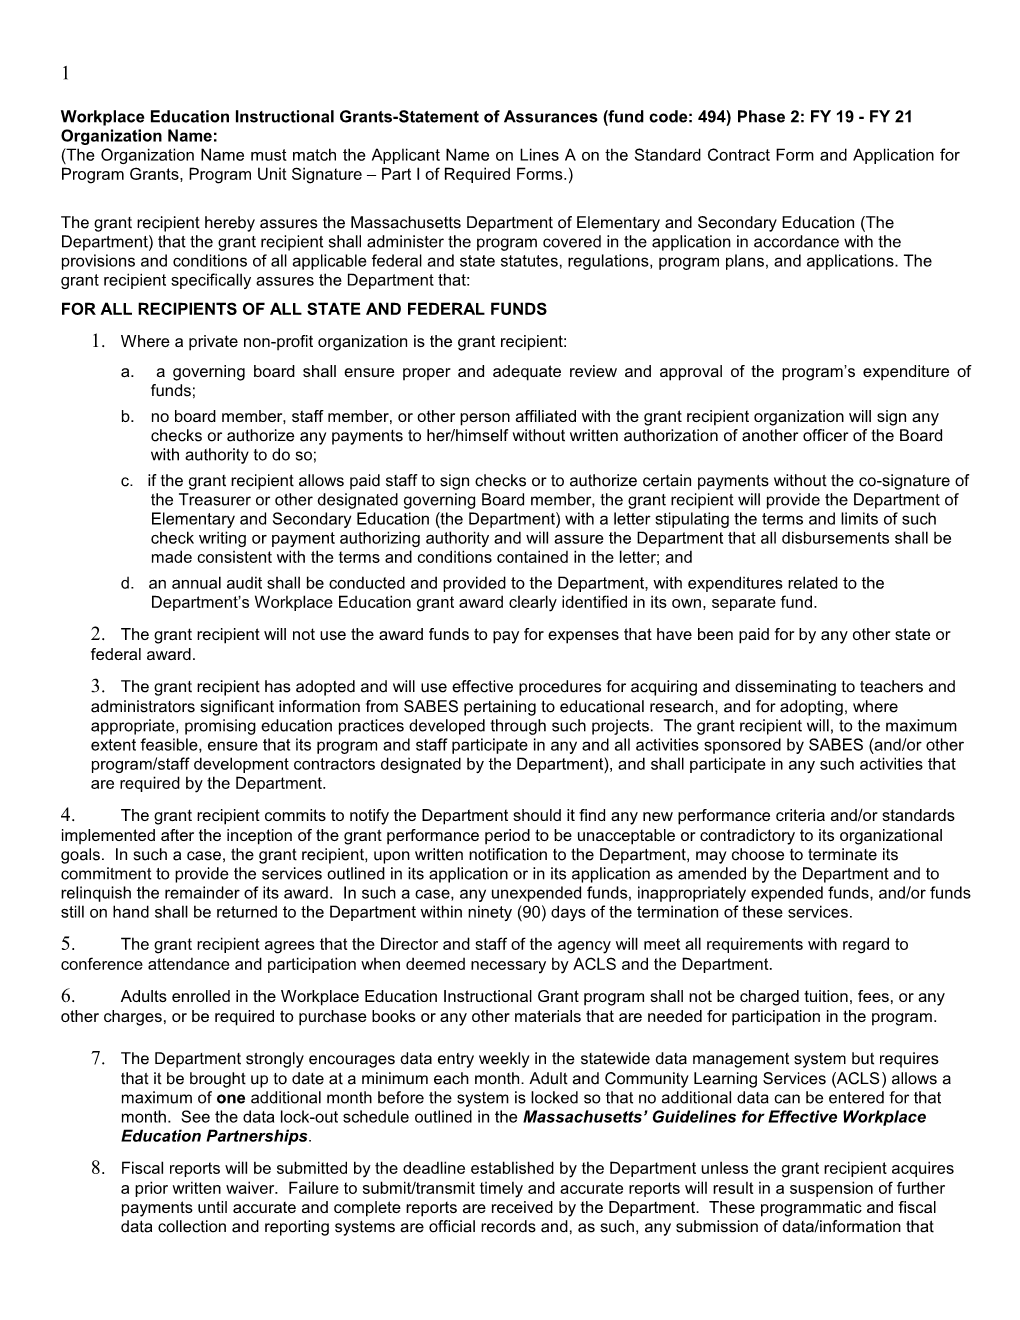 FY19 FC 494 538 Workplace Education Planning Grant Memo of Understanding Phase II Statement